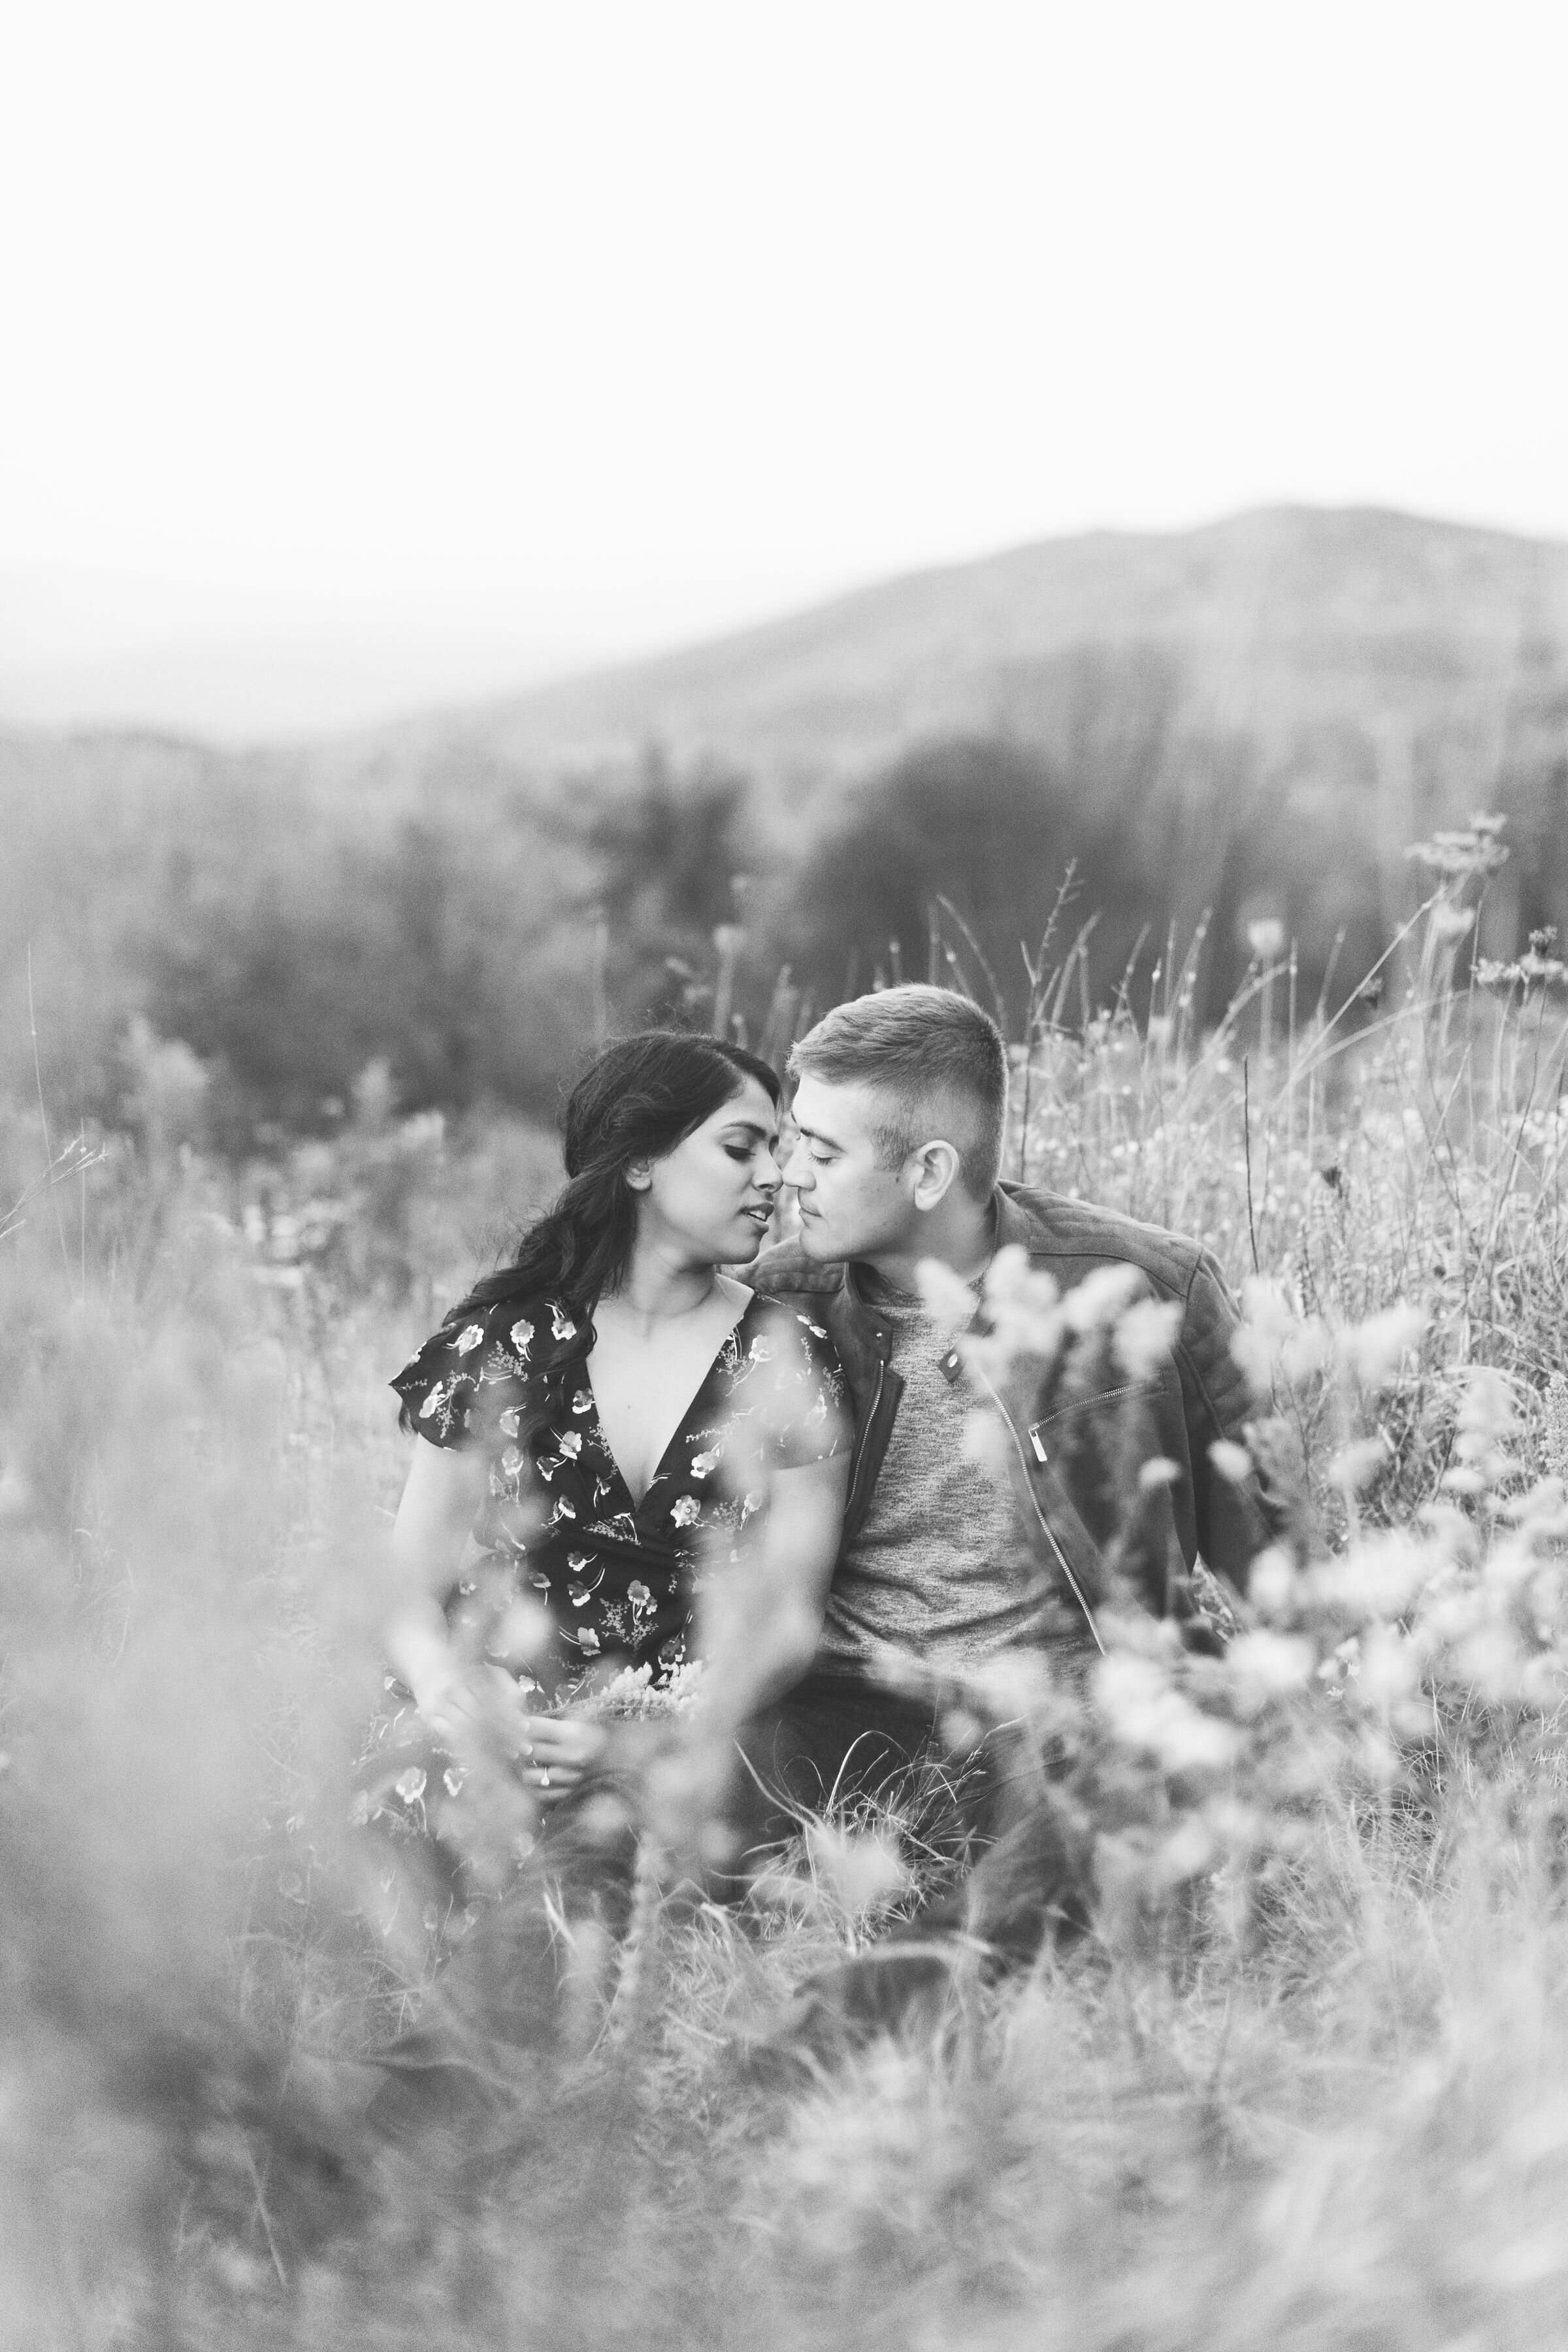 Max Patch Fall Couple Engagement Photos |  Couple sitting in wild flowers black and white image